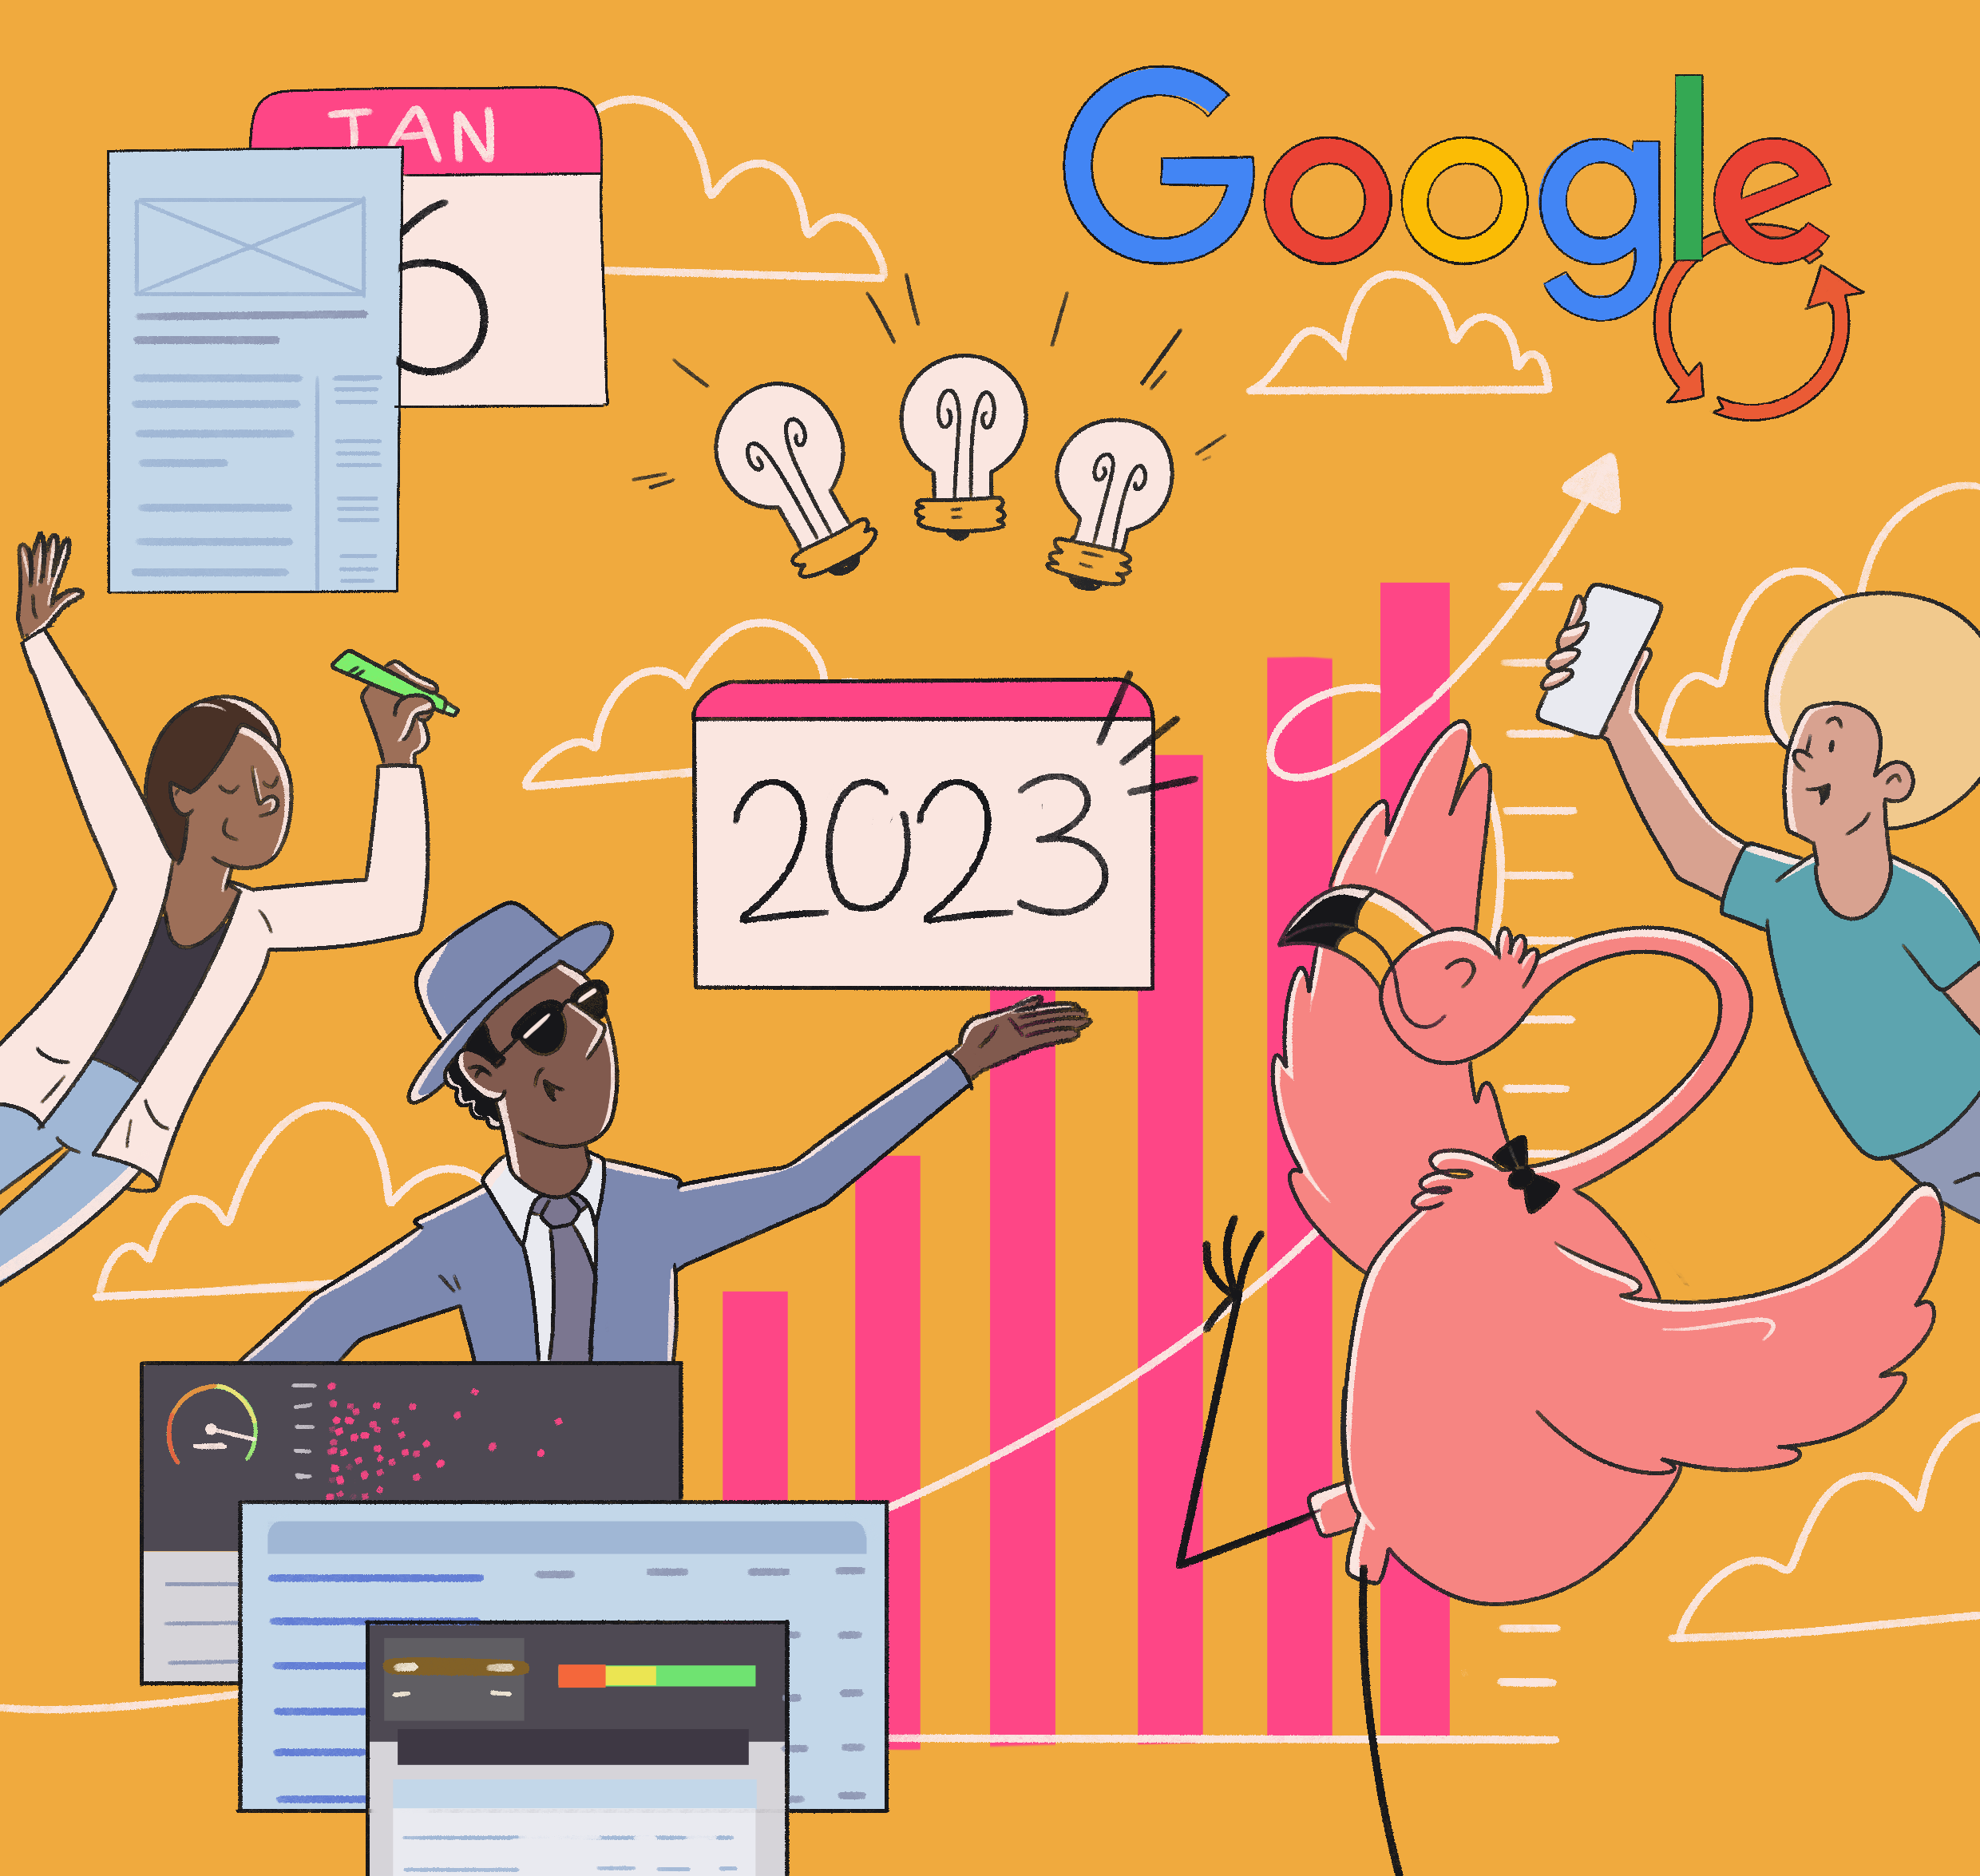 A cartoon illustration of a group of people and a flamingo, perfect for an SEO strategy.